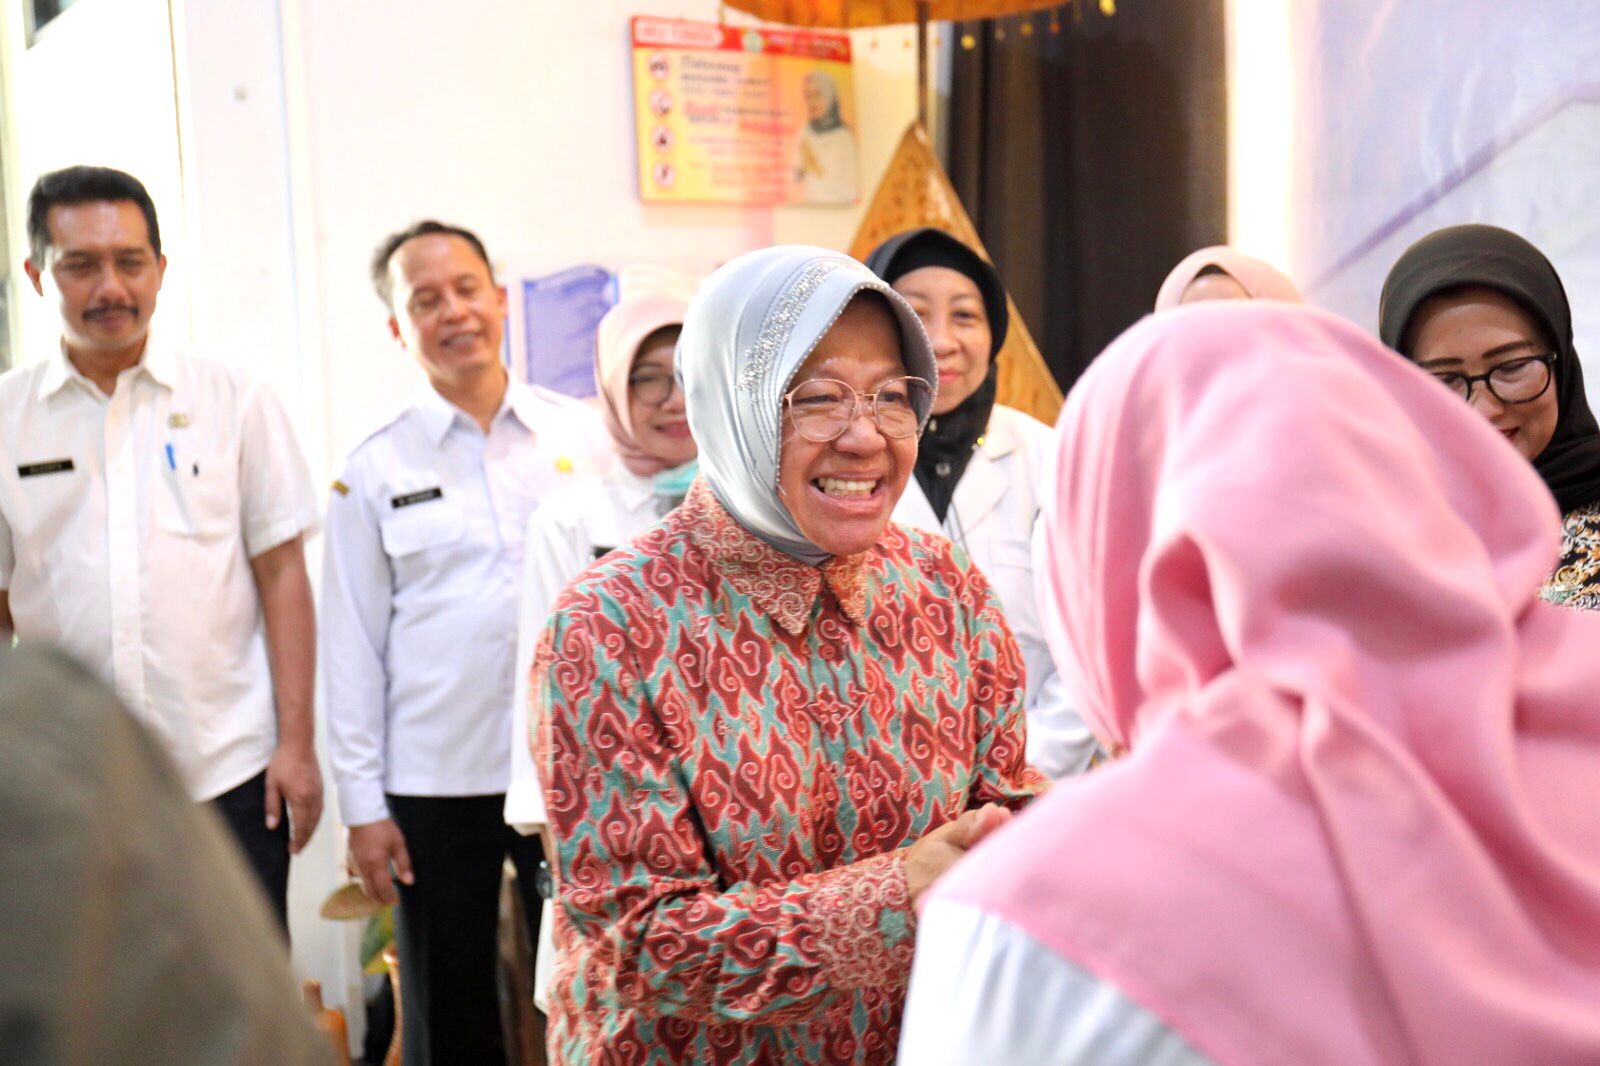 Ministry of Social Affairs and Pundi Amal SCTV Foundation Hold Cataract Surgery Social Service in Tulungagung